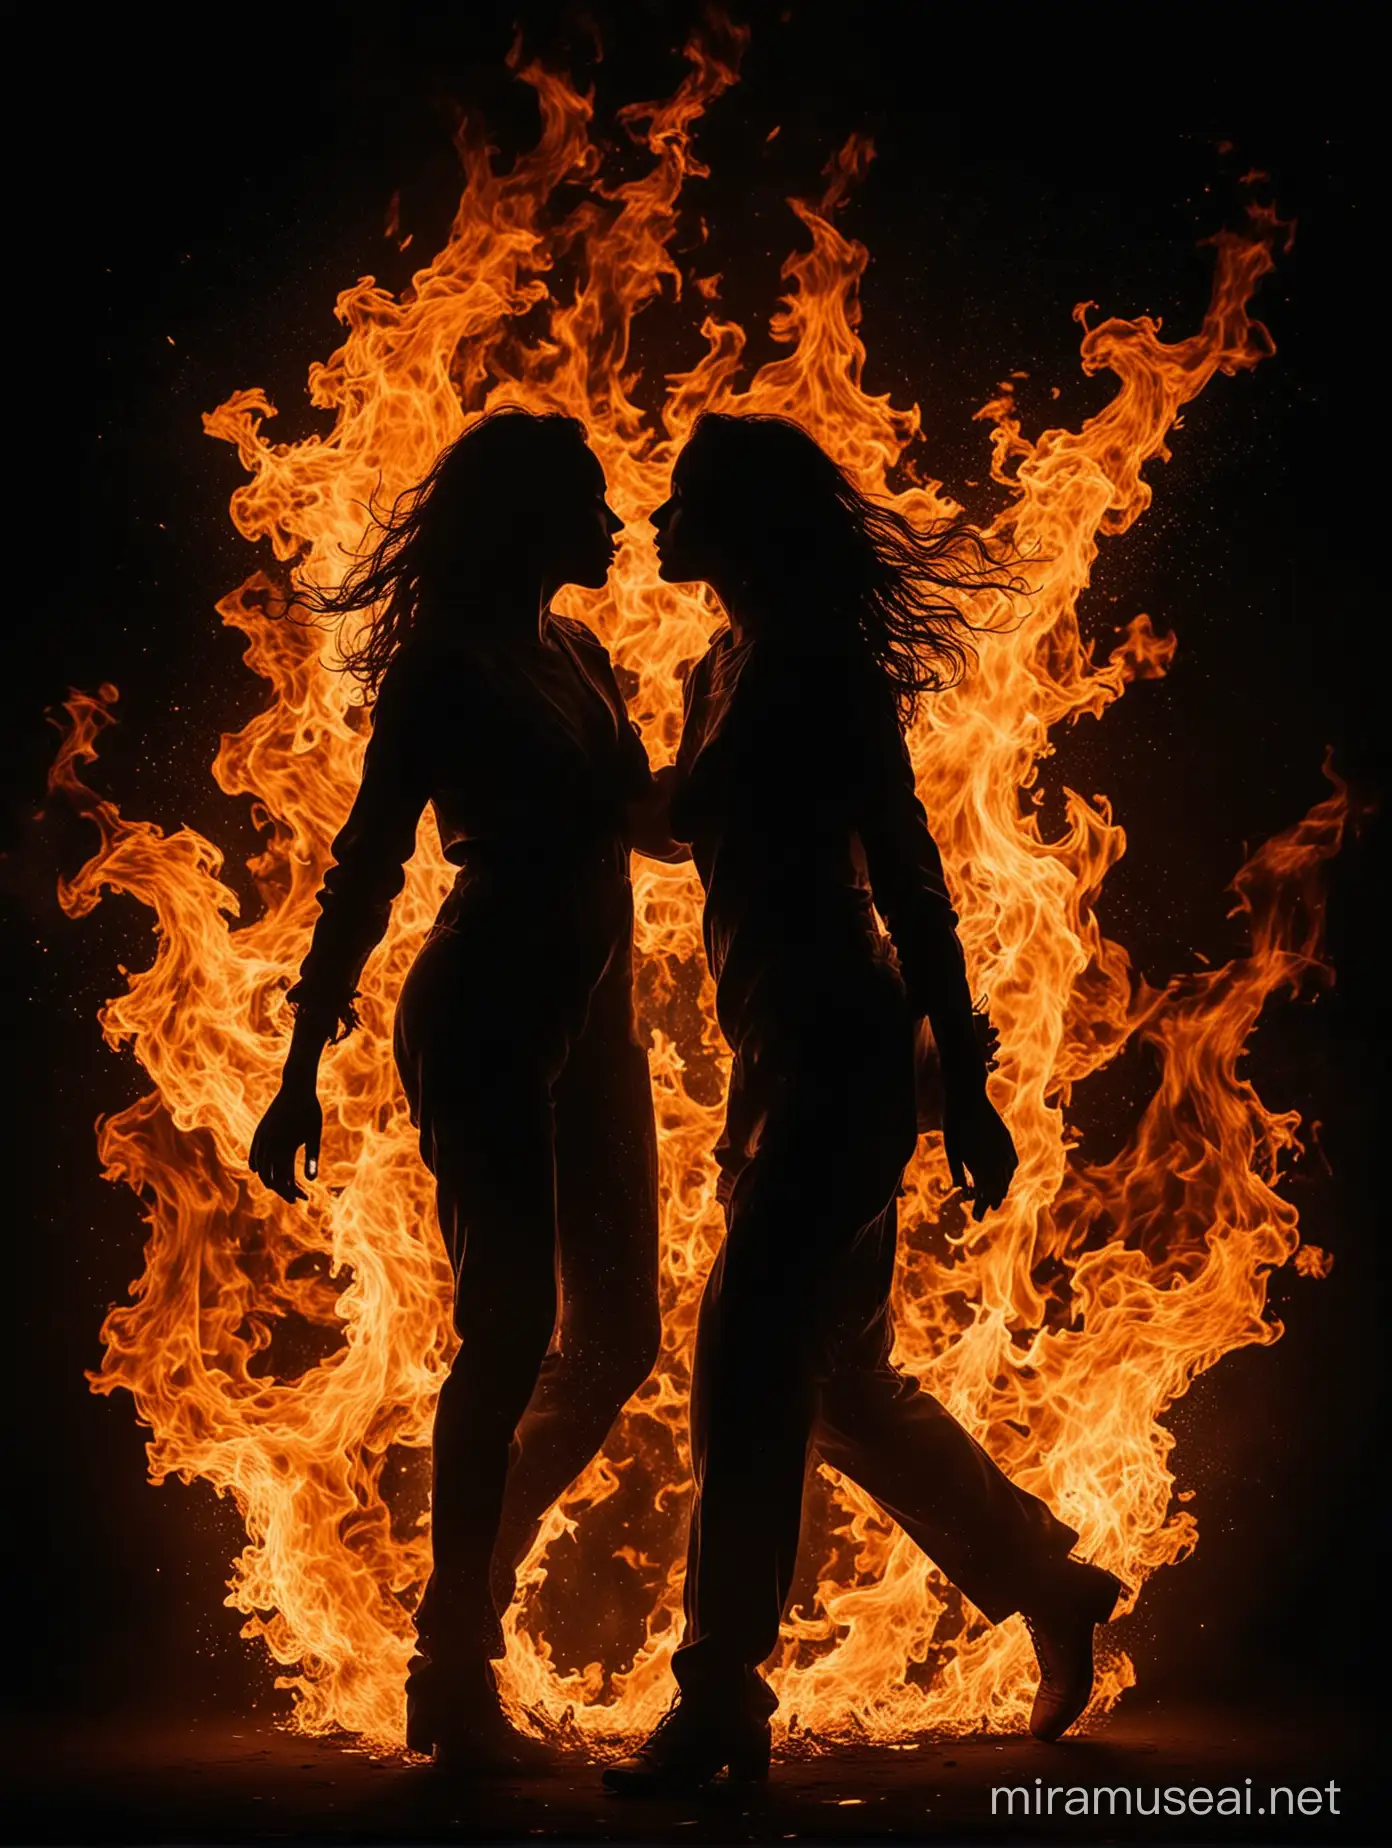 black background, silhouette of a two woman engulfed in flames, action-packed


